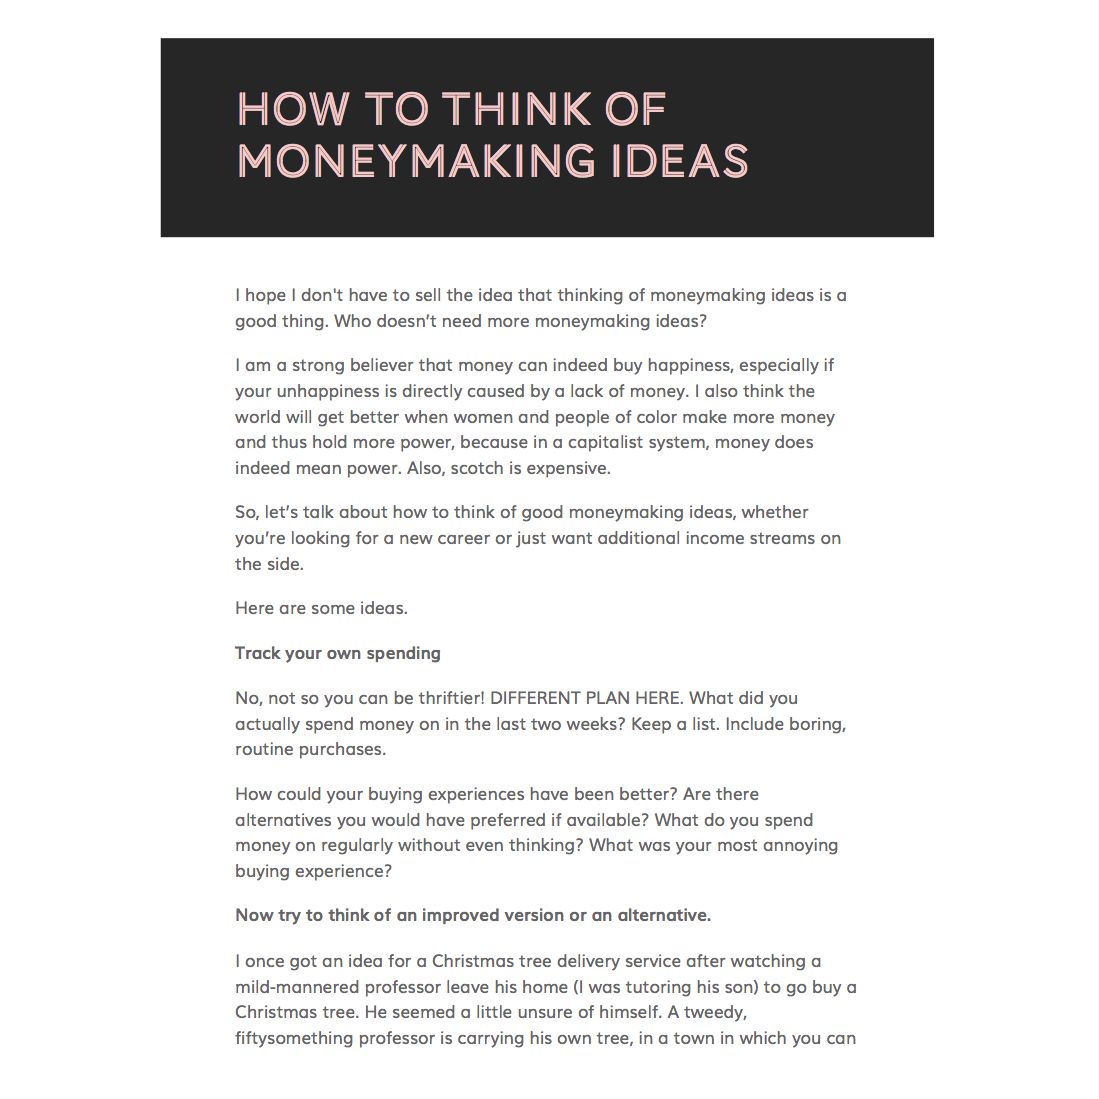 The GetBullish Guide to Thinking More Productively About Money